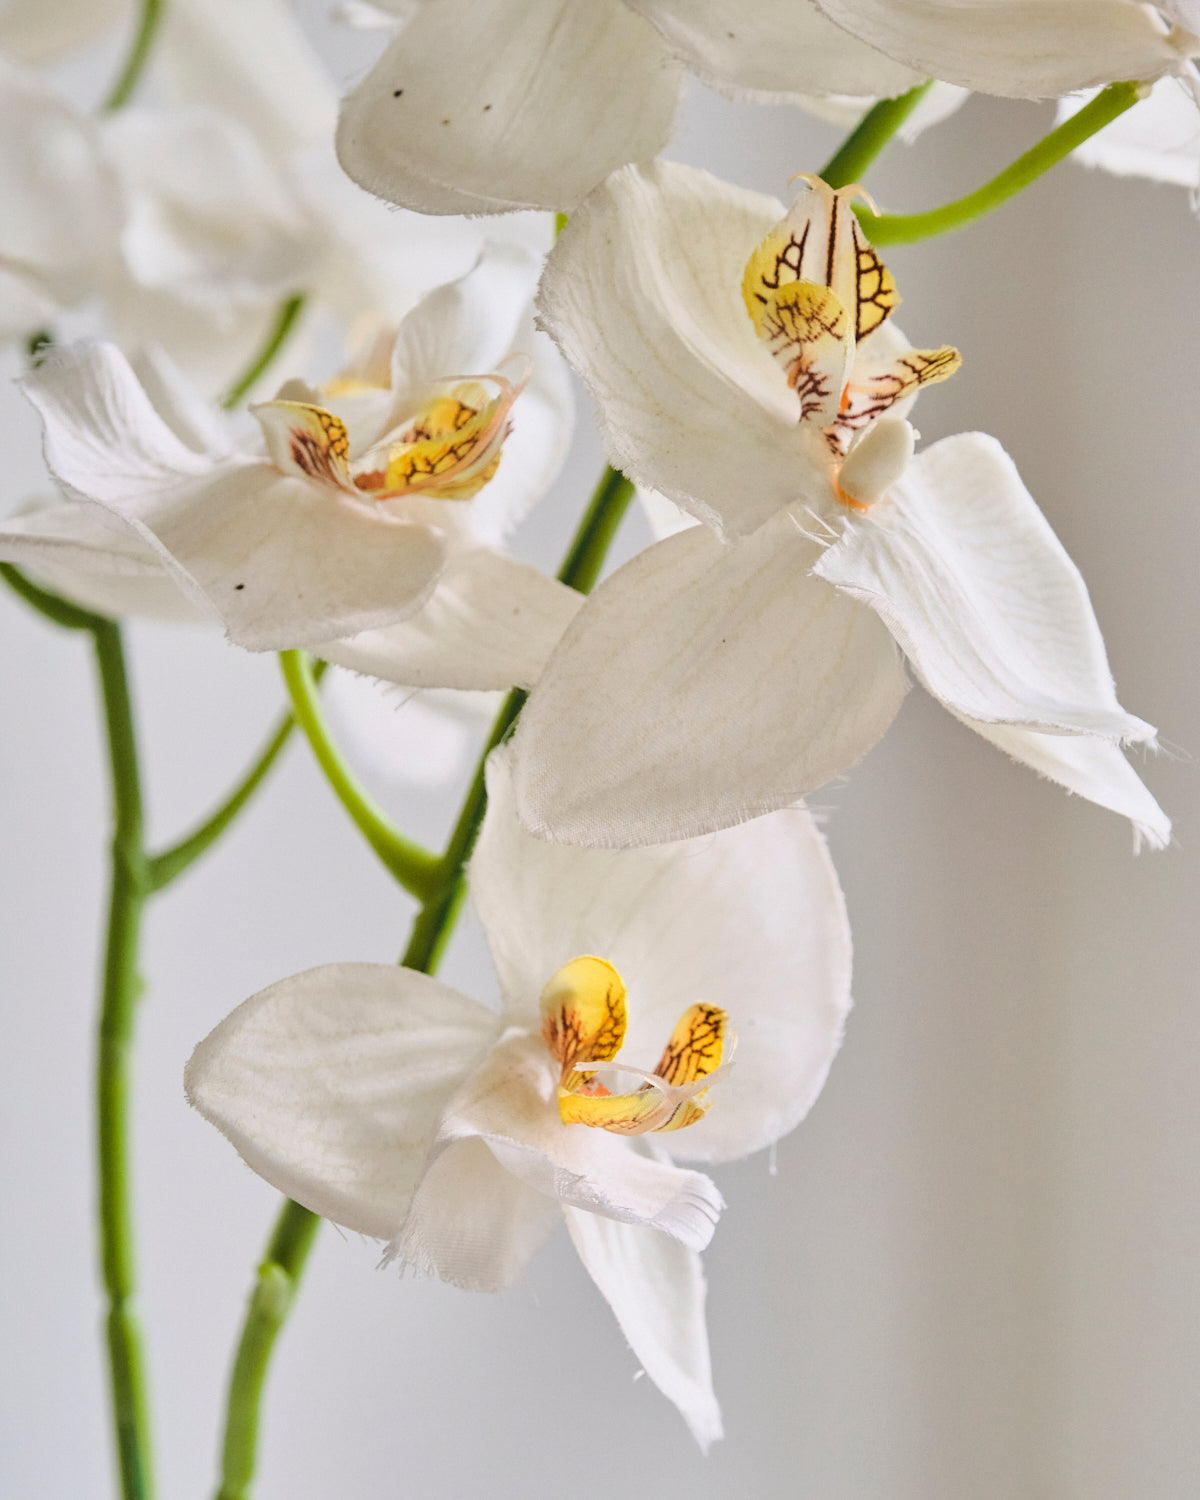 Artificial Flower - Orchid